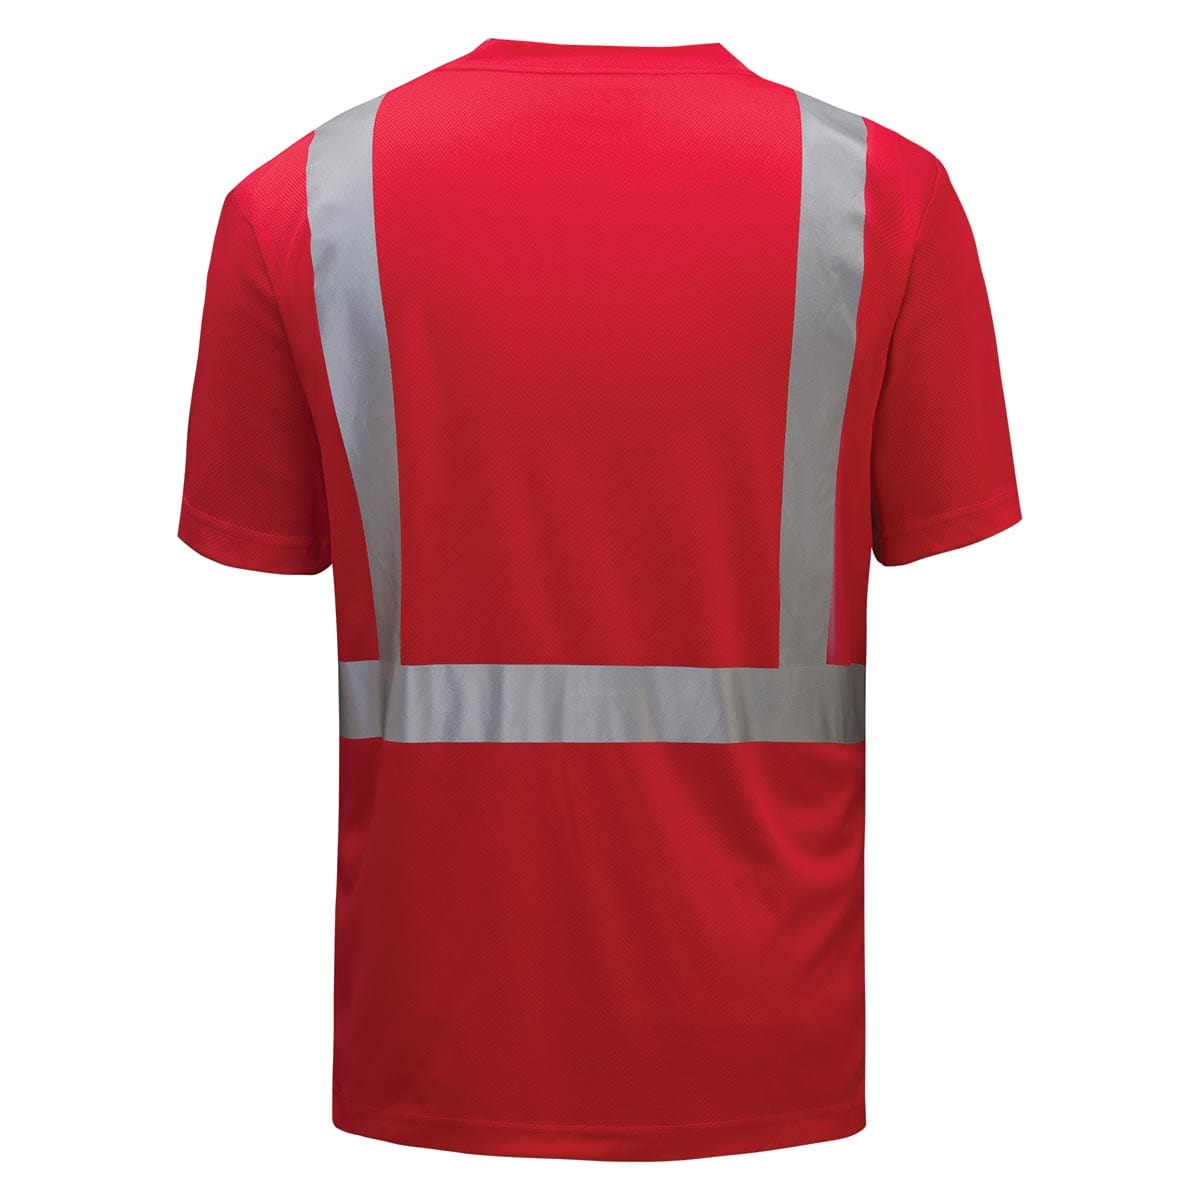 GSS Safety Non-ANSI Short Sleeve Enhanced Visibility Shirt with Reflective Tape-Blue